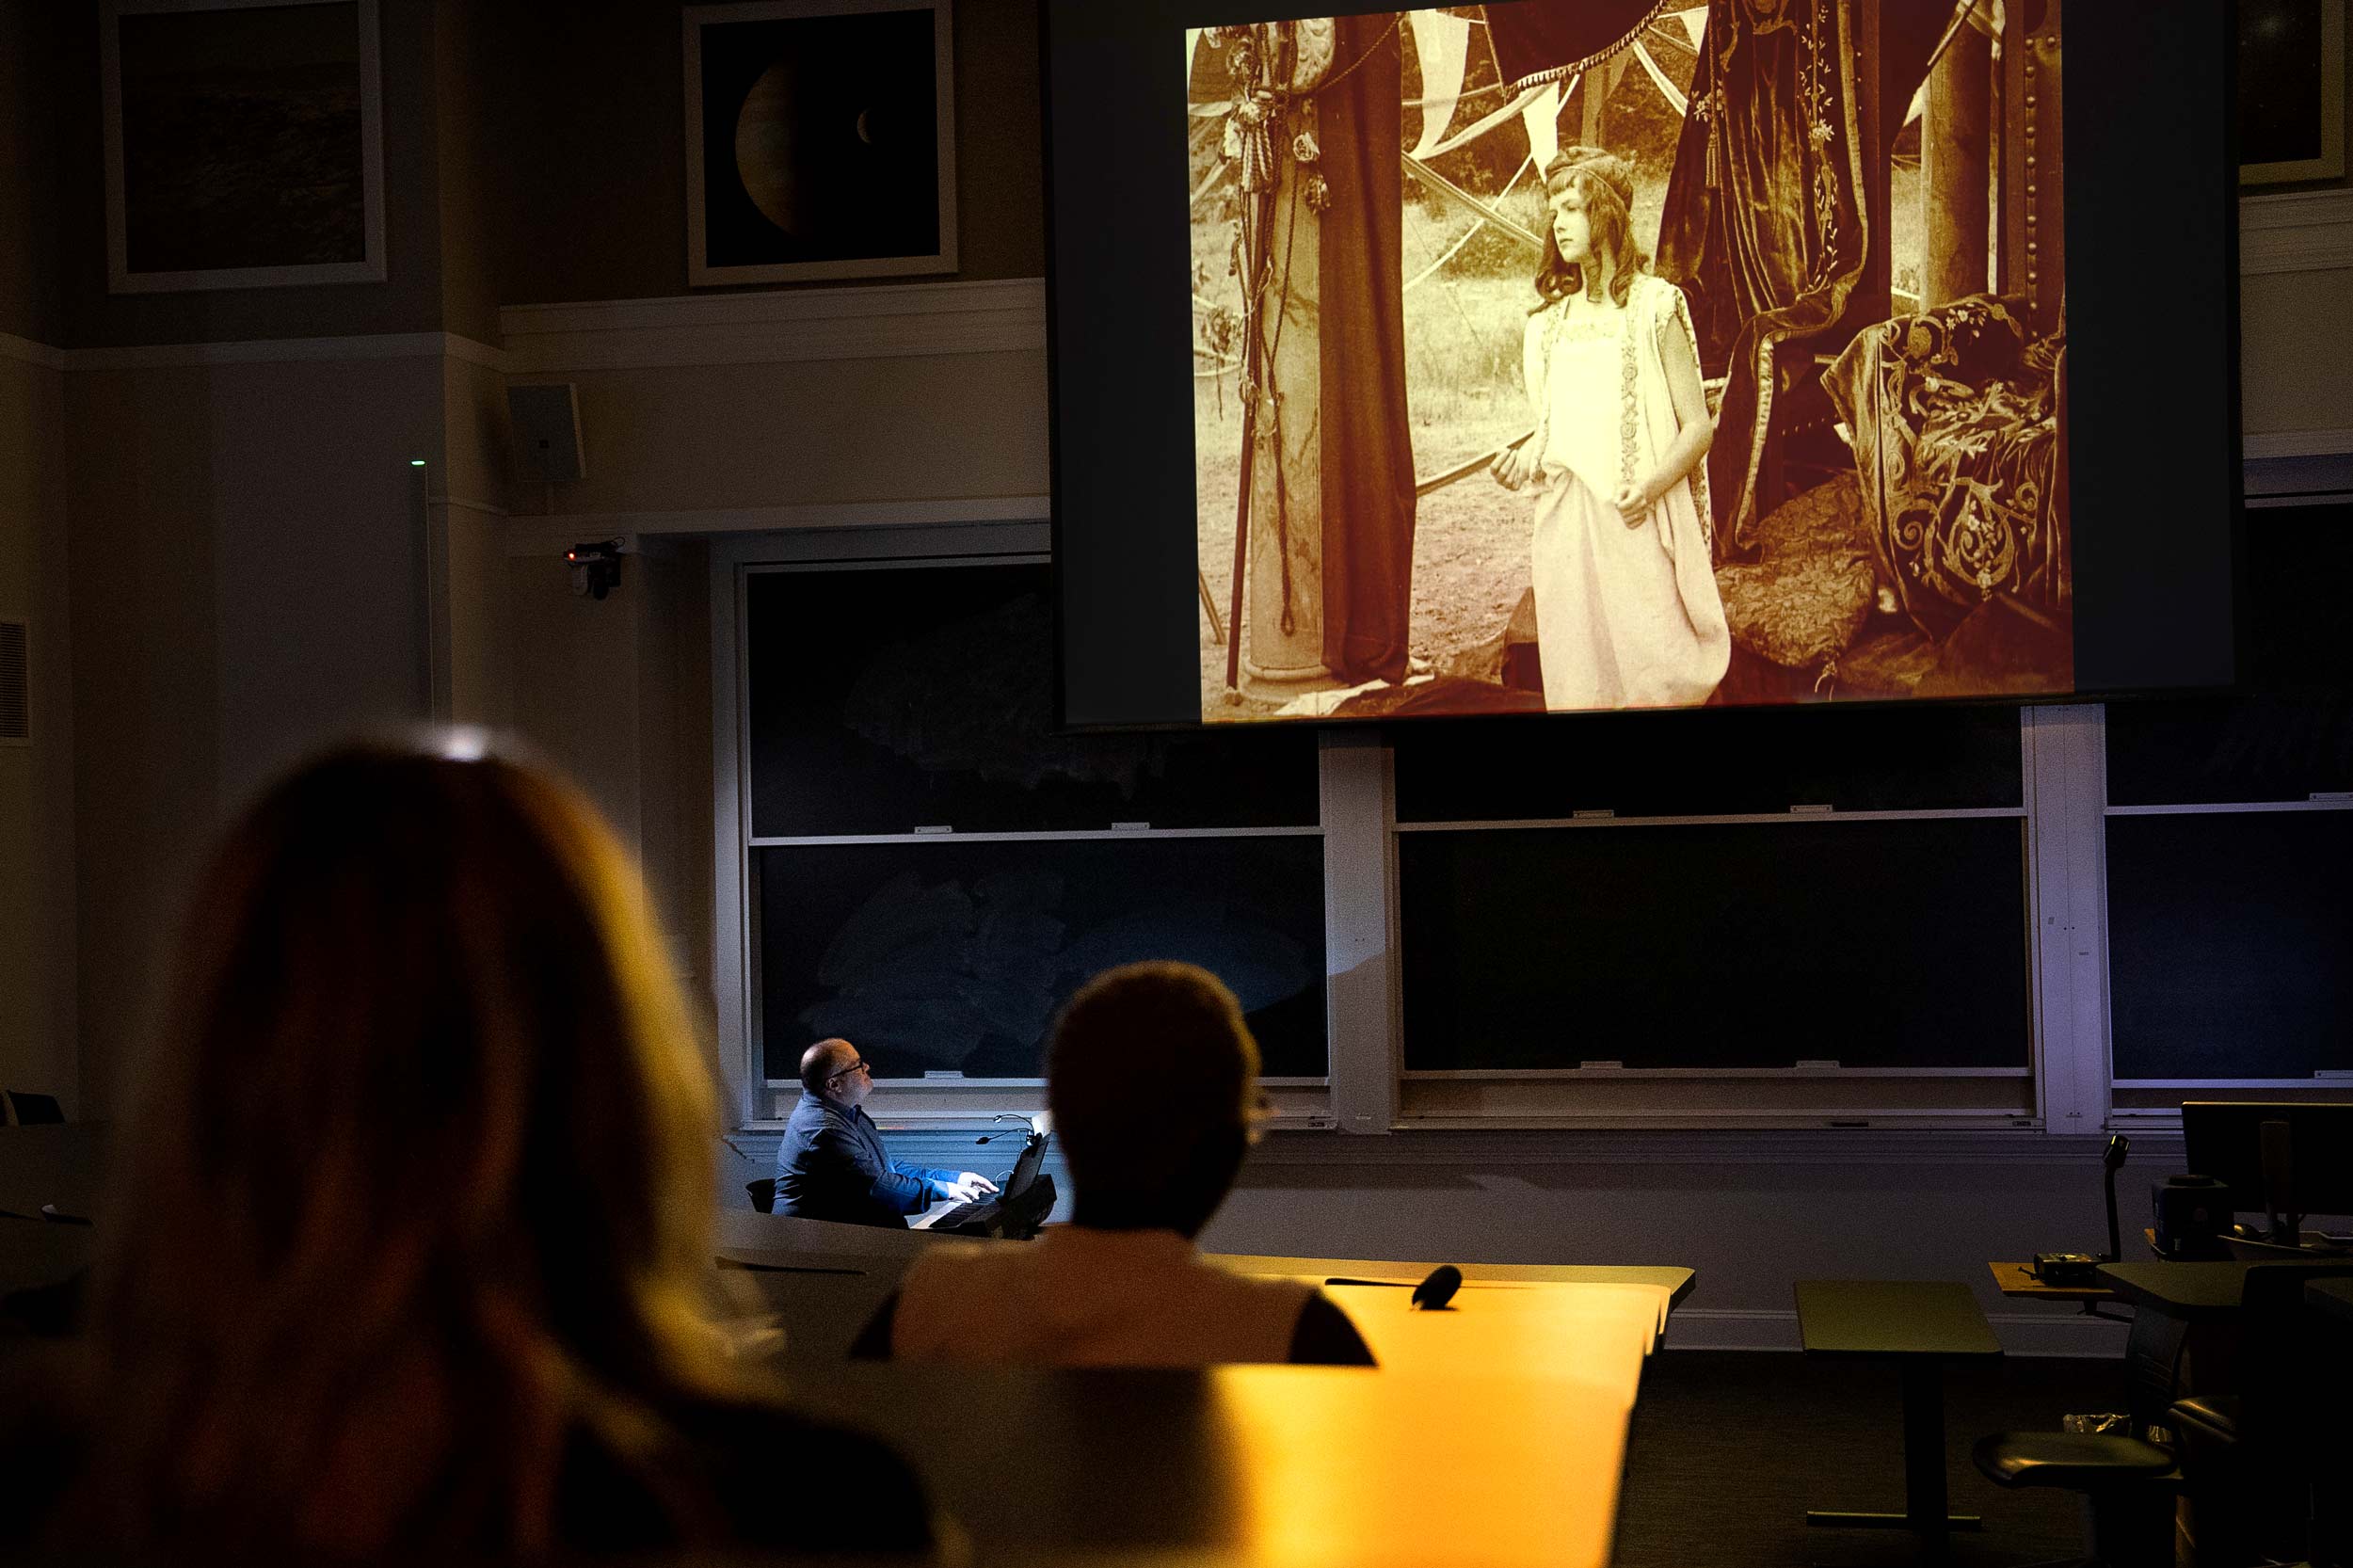 Audiences sit in a classroom facing a projector screen, which shows a sepia-toned scene featuring a girl in a dress. Matthew Marshall sits at a piano under the projector screen.